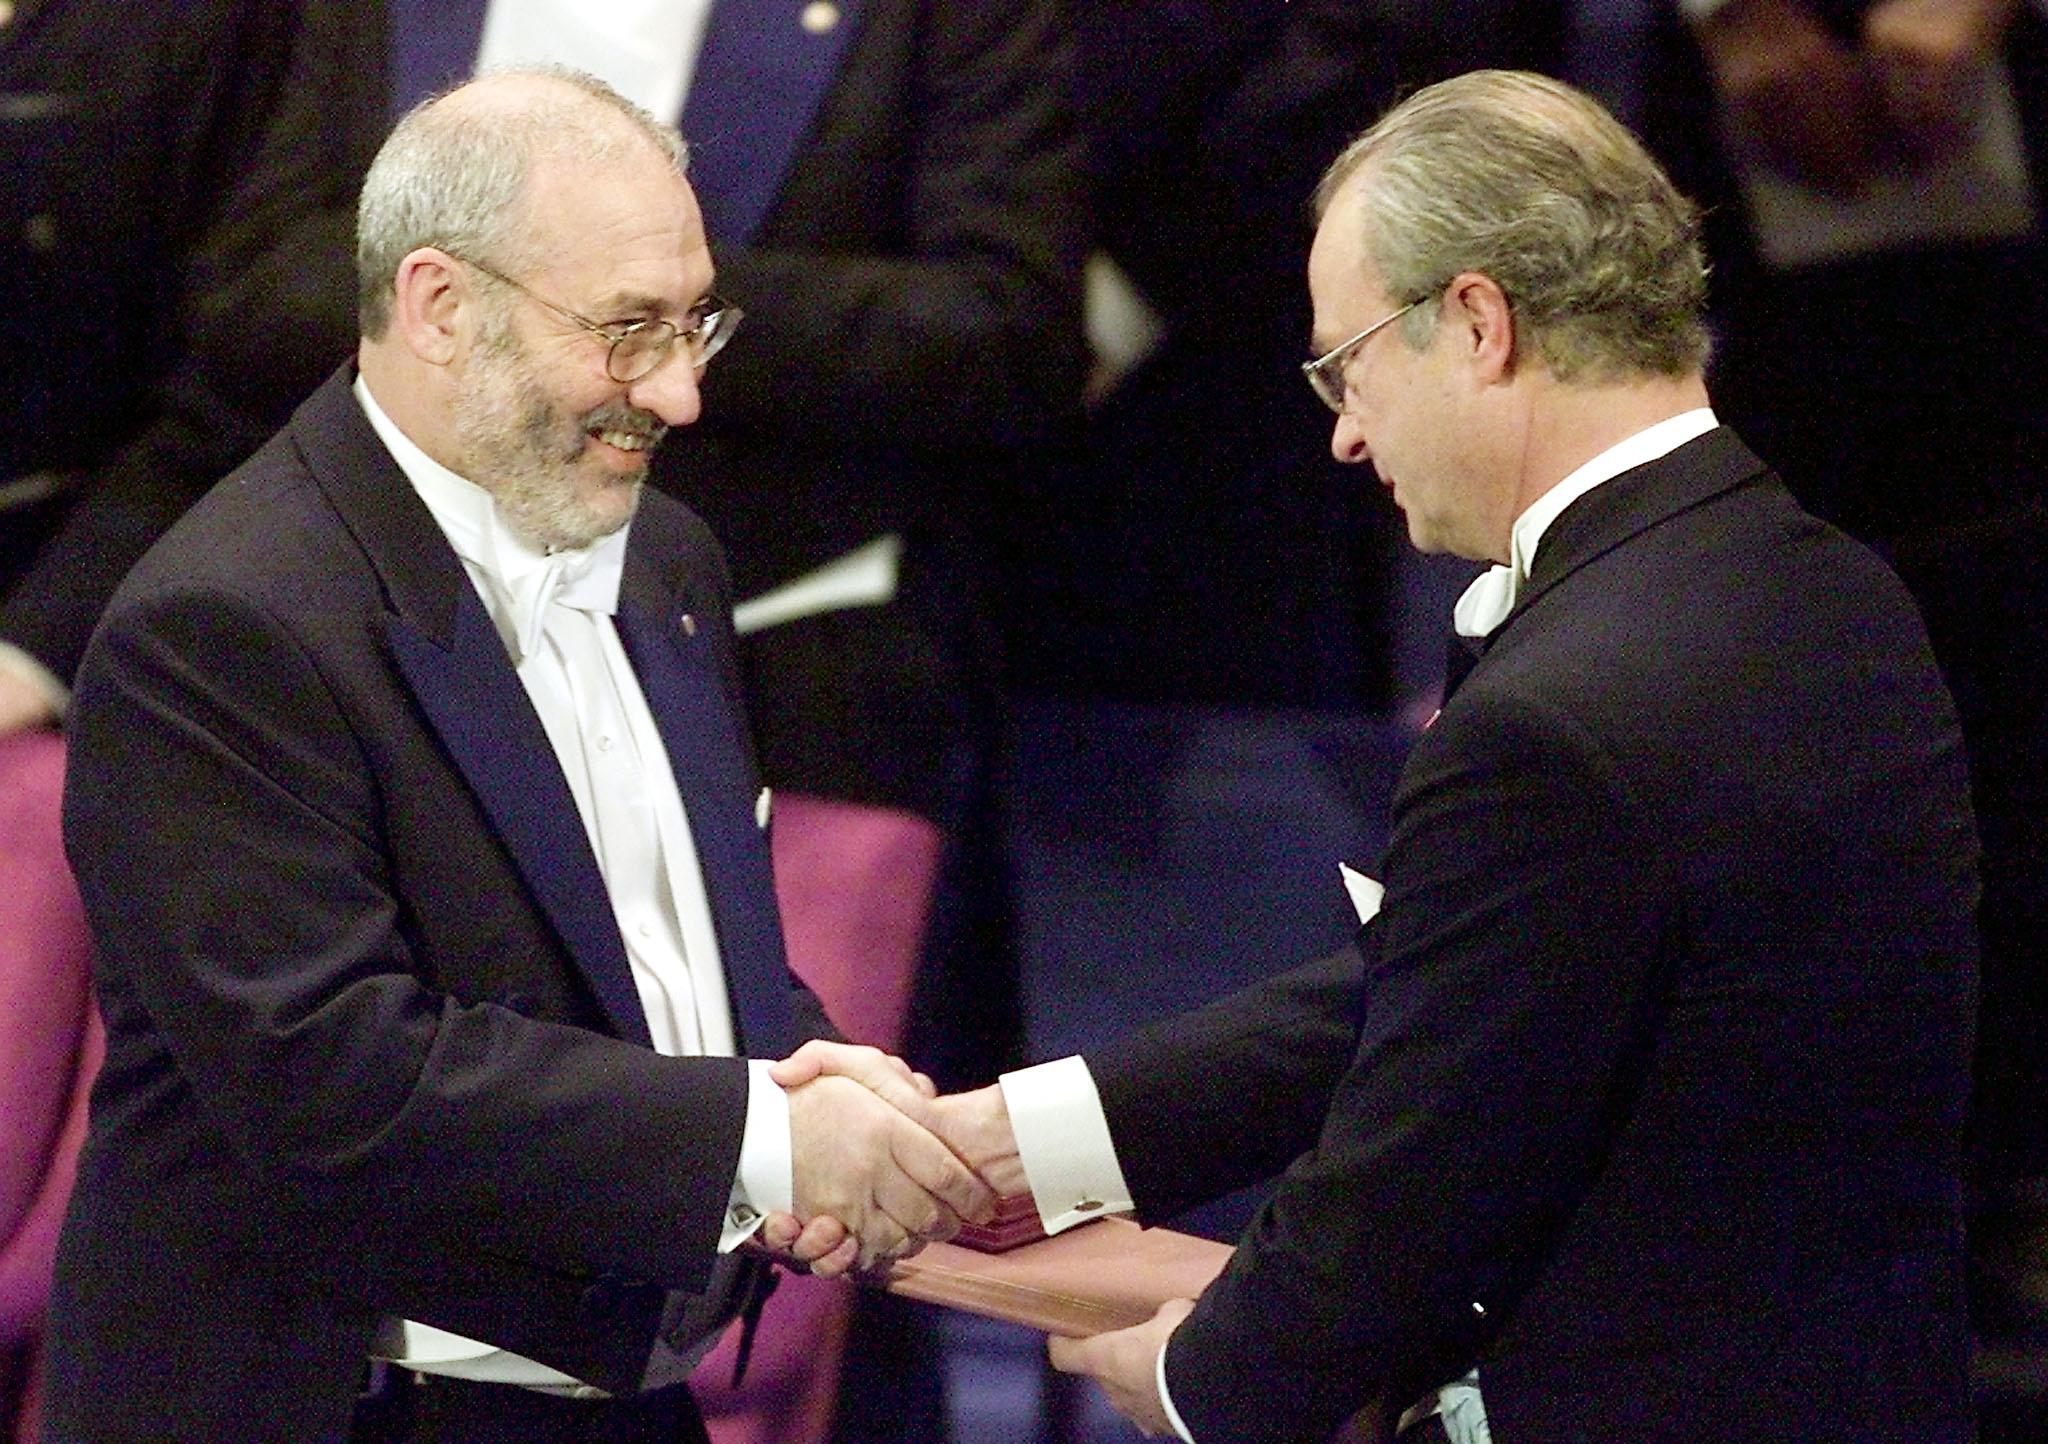 Stiglitz (L) from the US receives the Nobel Prize for Economics from the King of Sweden in 2001